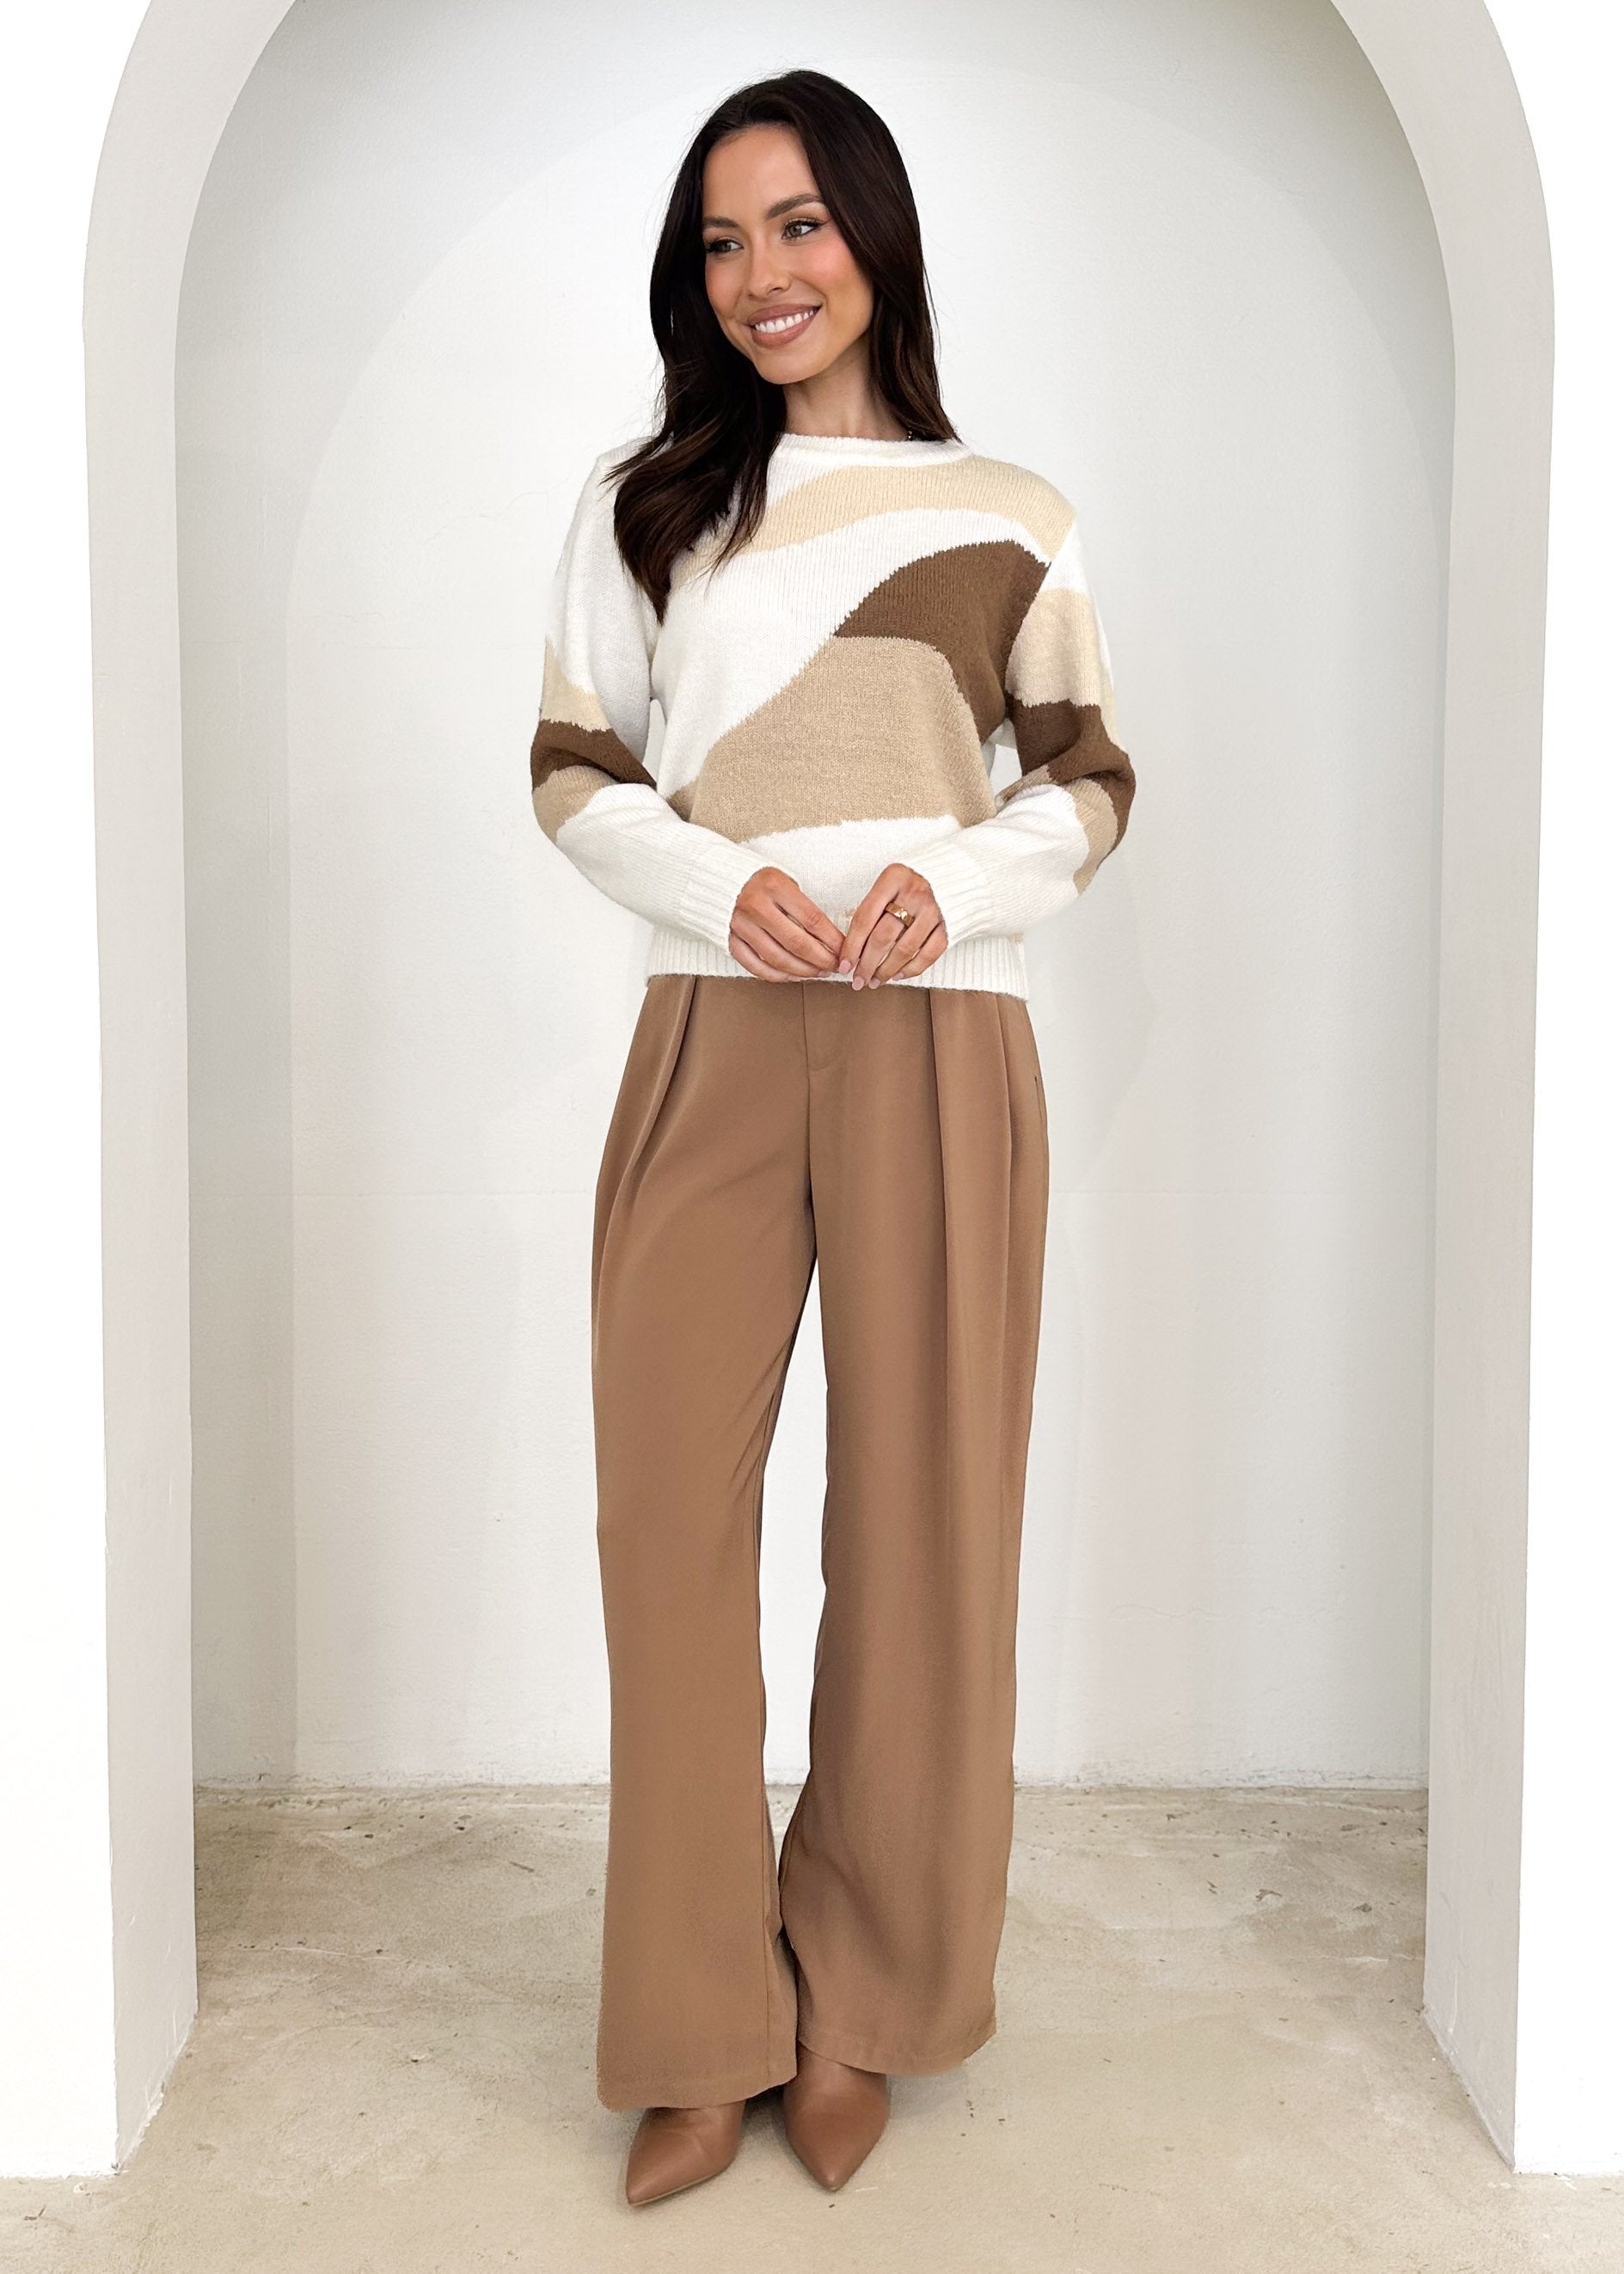 Issarae Sweater - Brown Abstract